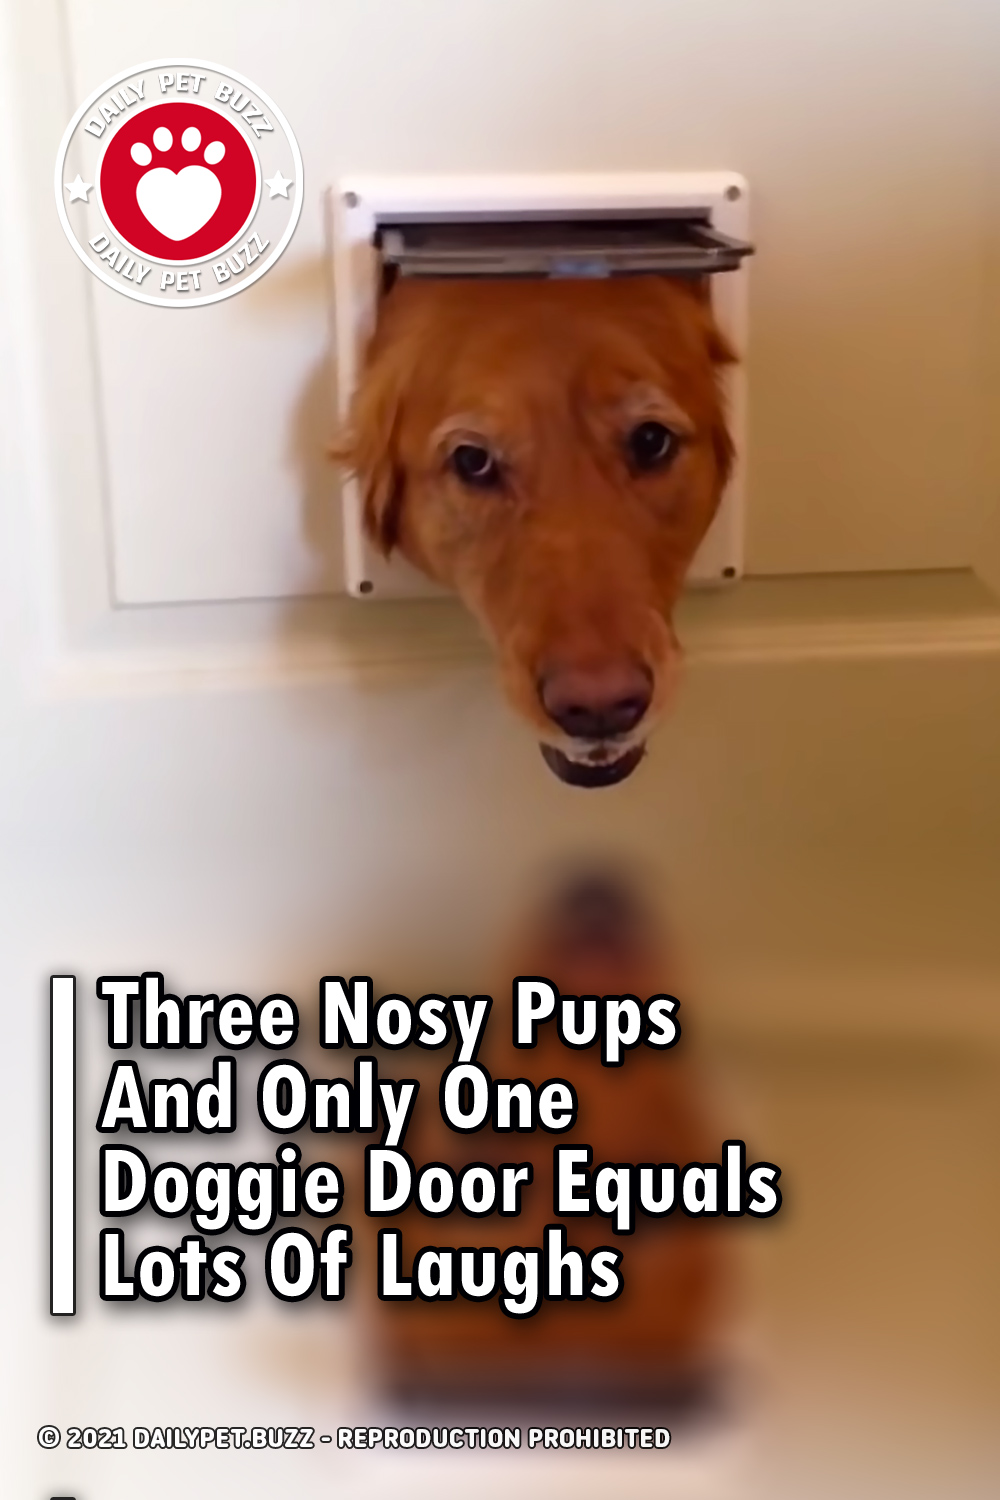 Three Nosy Pups And Only One Doggie Door Equals Lots Of Laughs